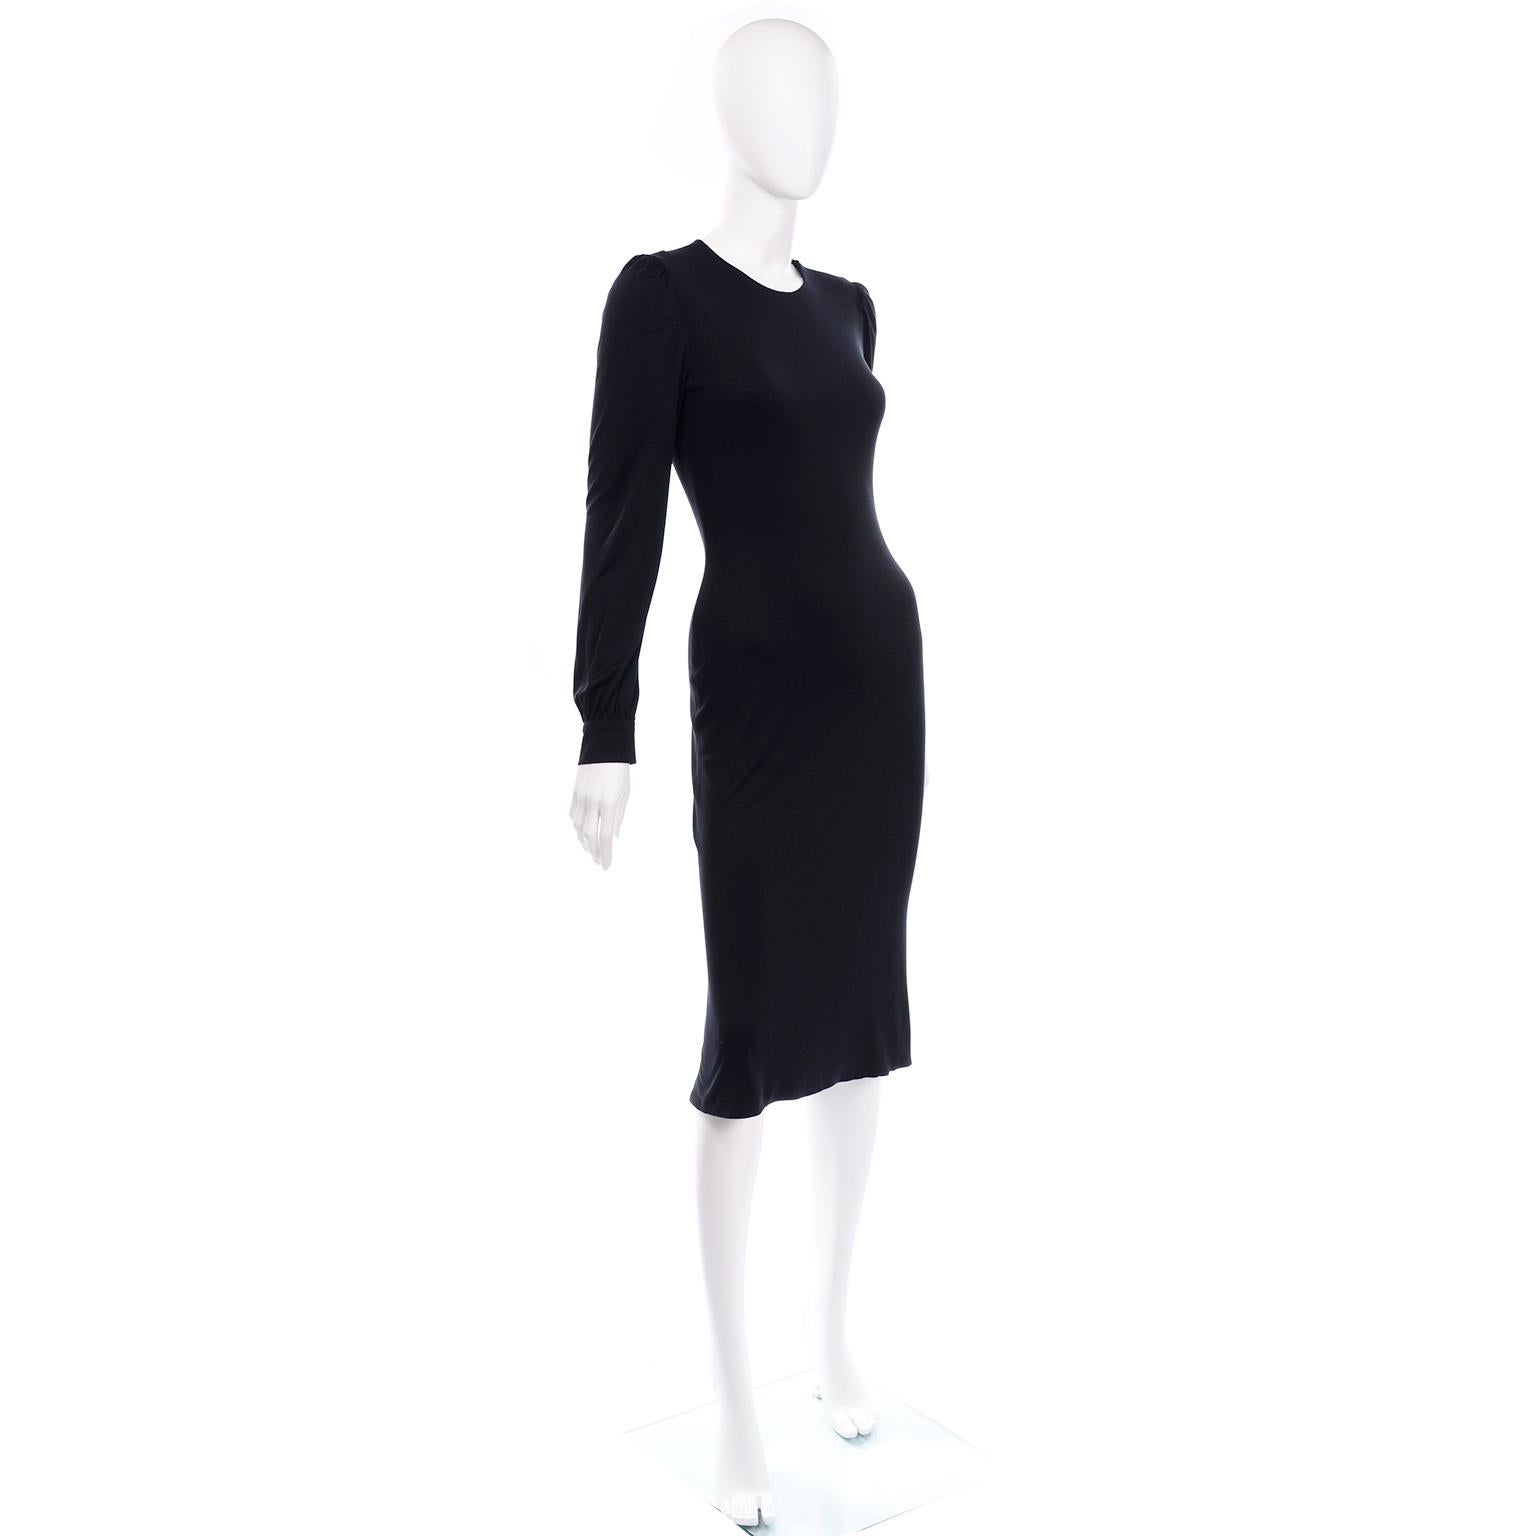 Alexander McQueen Black Dress With Low Lace Back 2005 The Man Who Knew Too Much For Sale 2